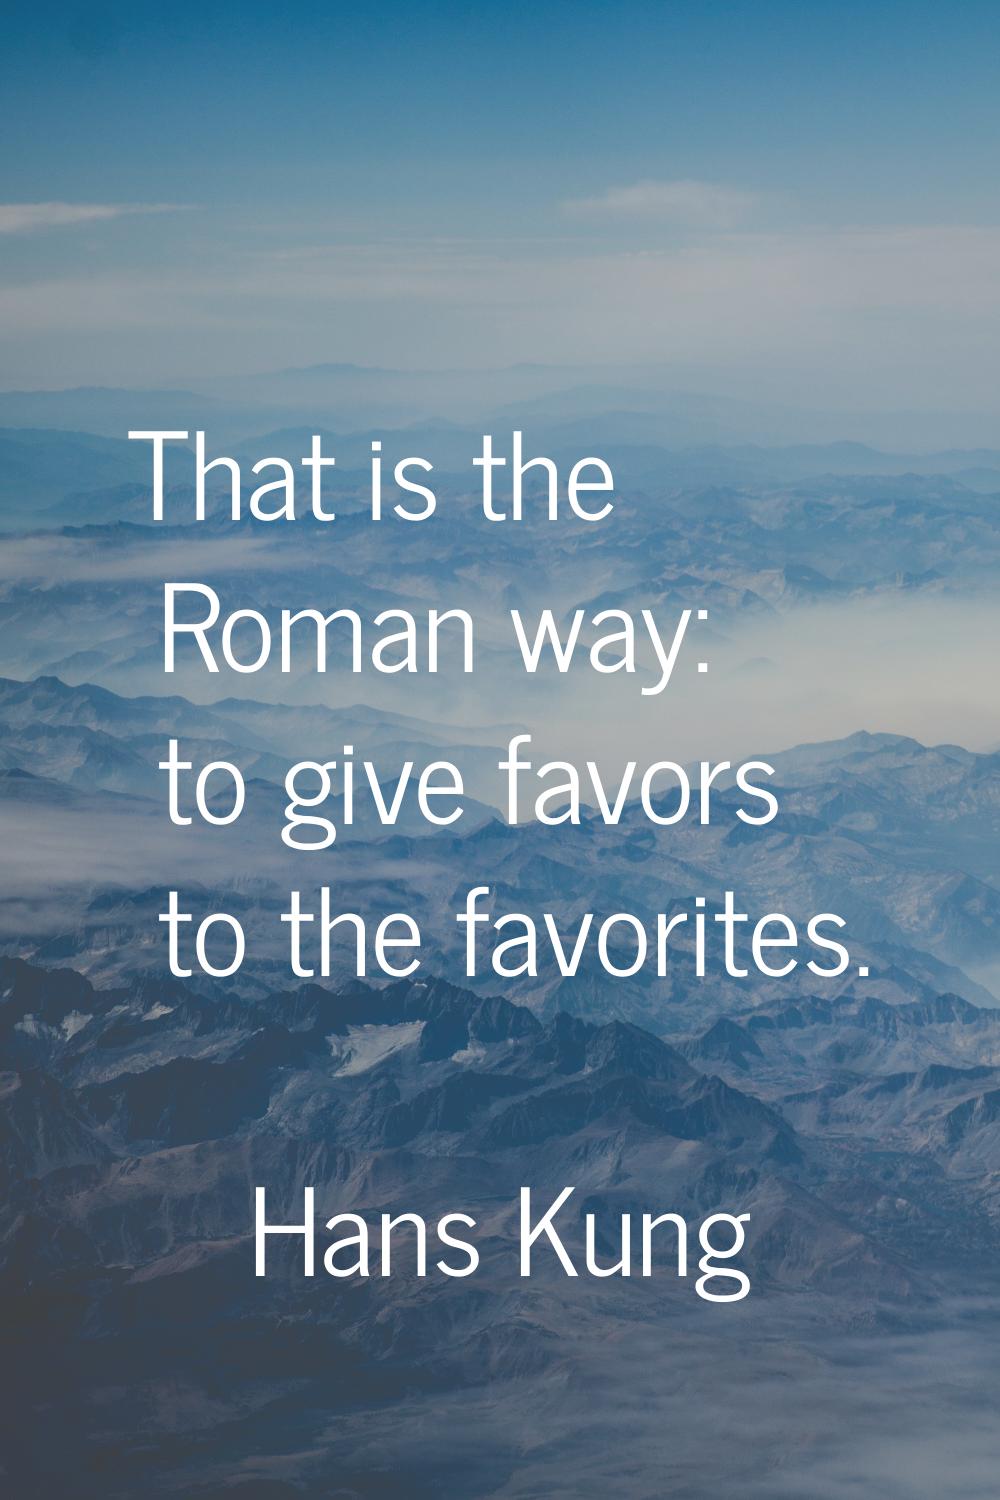 That is the Roman way: to give favors to the favorites.